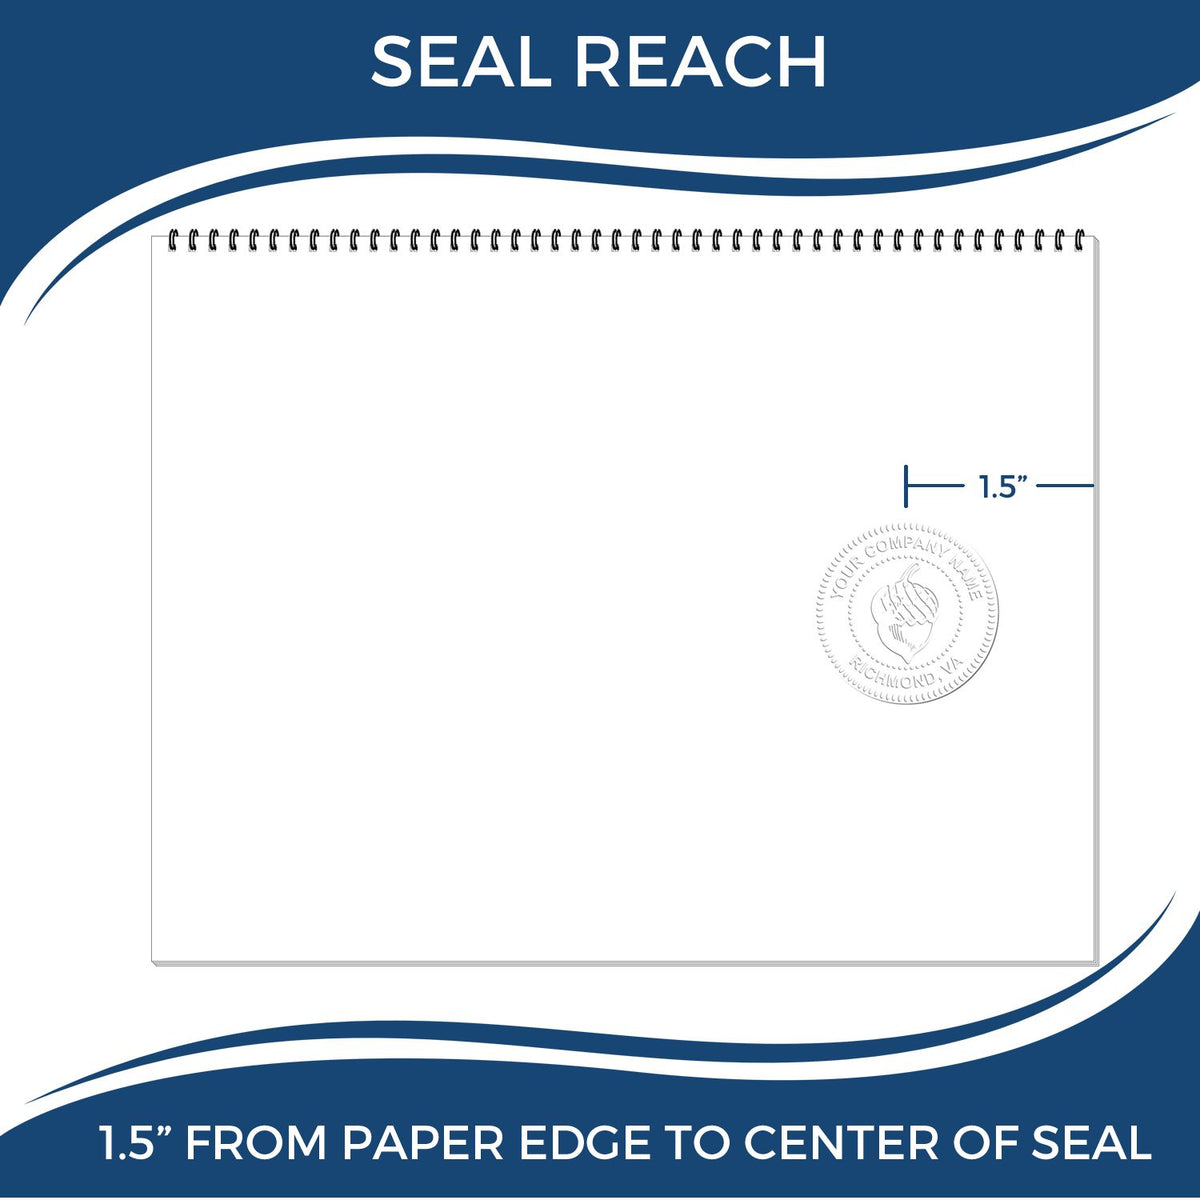 An infographic showing the seal reach which is represented by a ruler and a miniature seal image of the Arizona Geologist Desk Seal